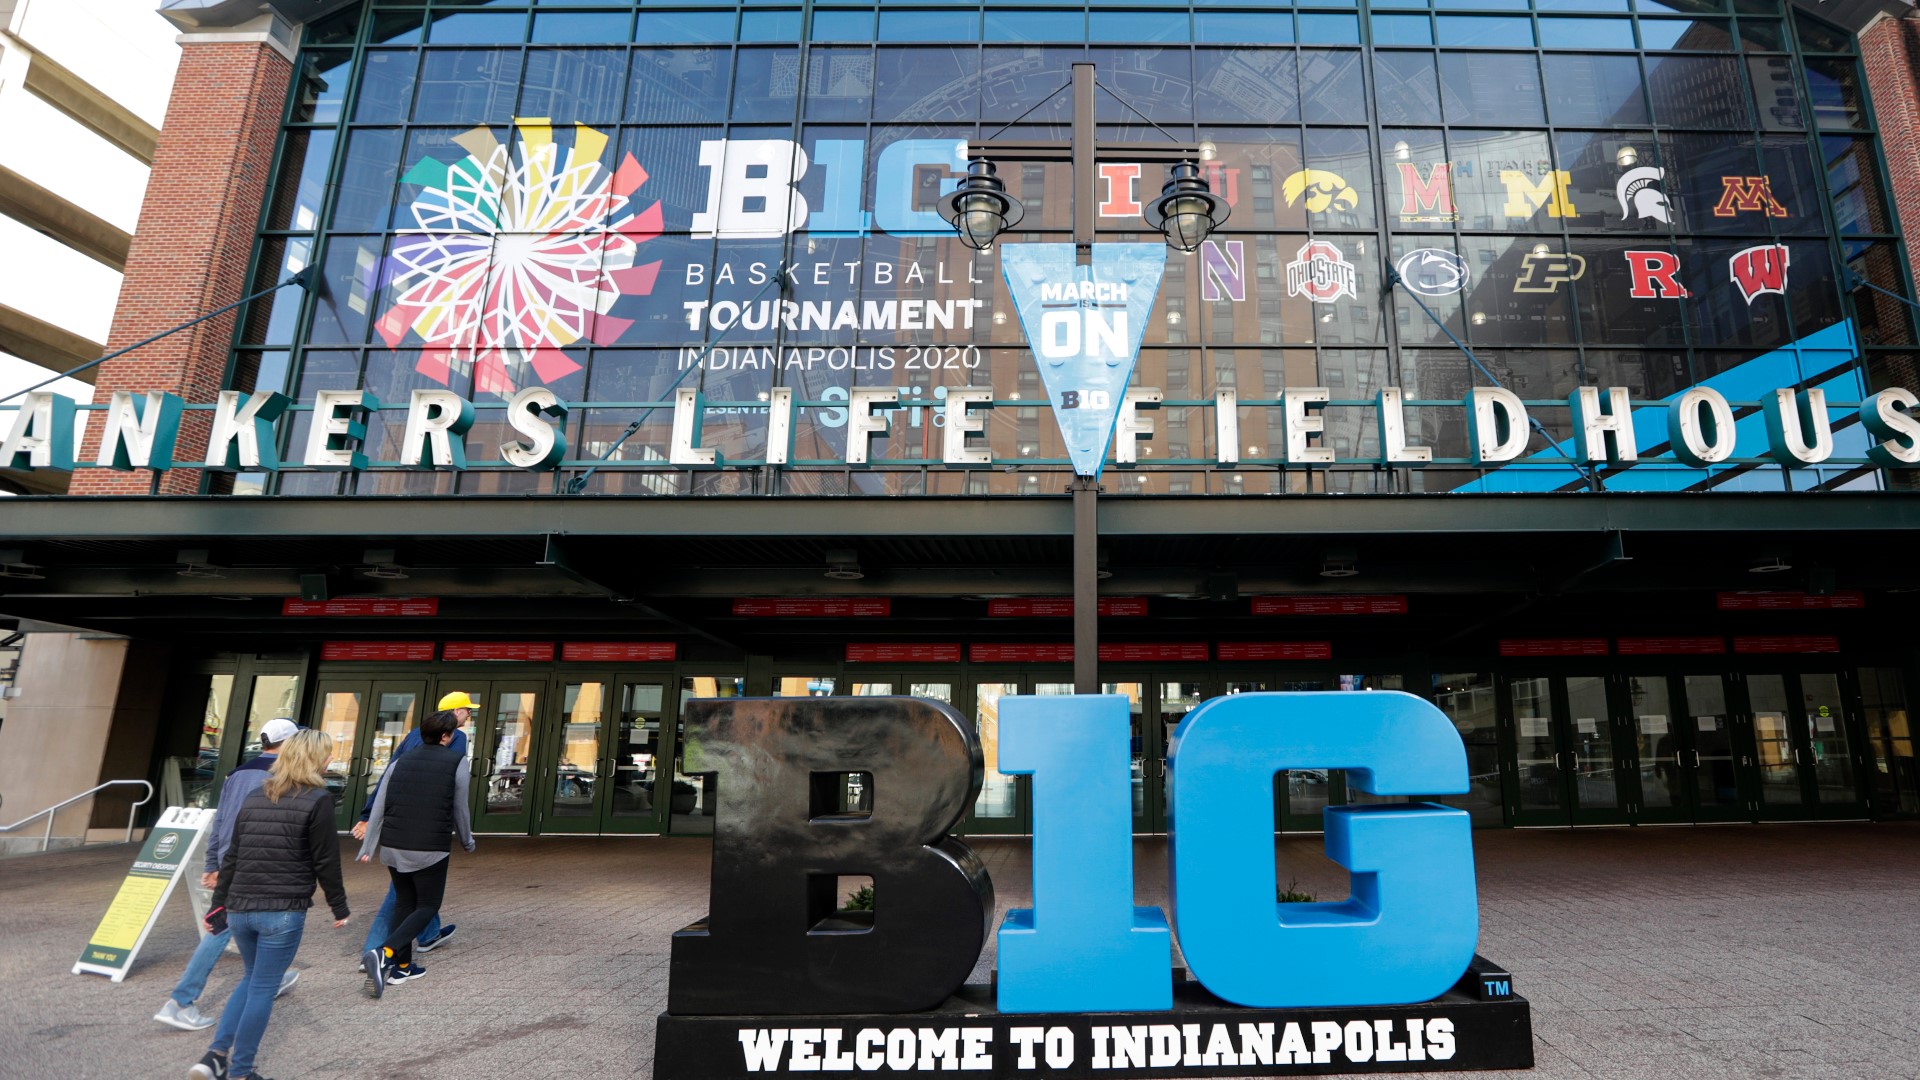 The Big Ten Conference announced the rest of the men's basketball tournament, effective immediately.